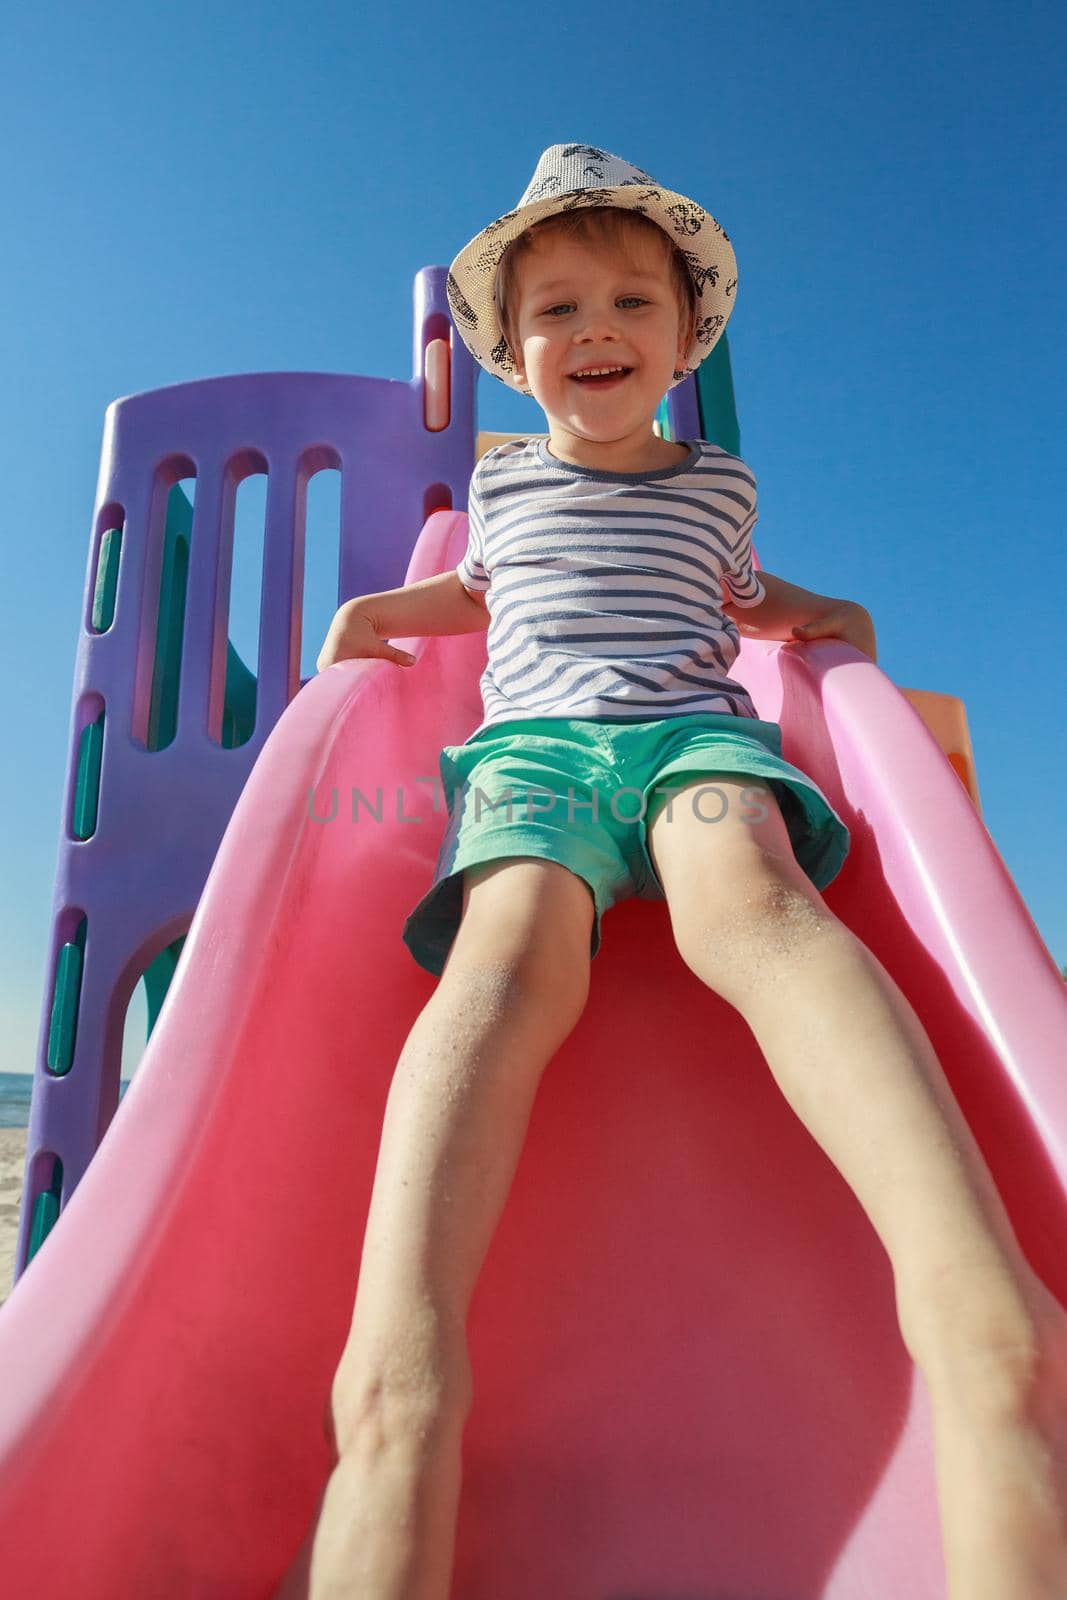 Boy sliding down playground pink slide, in a blue sky background. by Lincikas